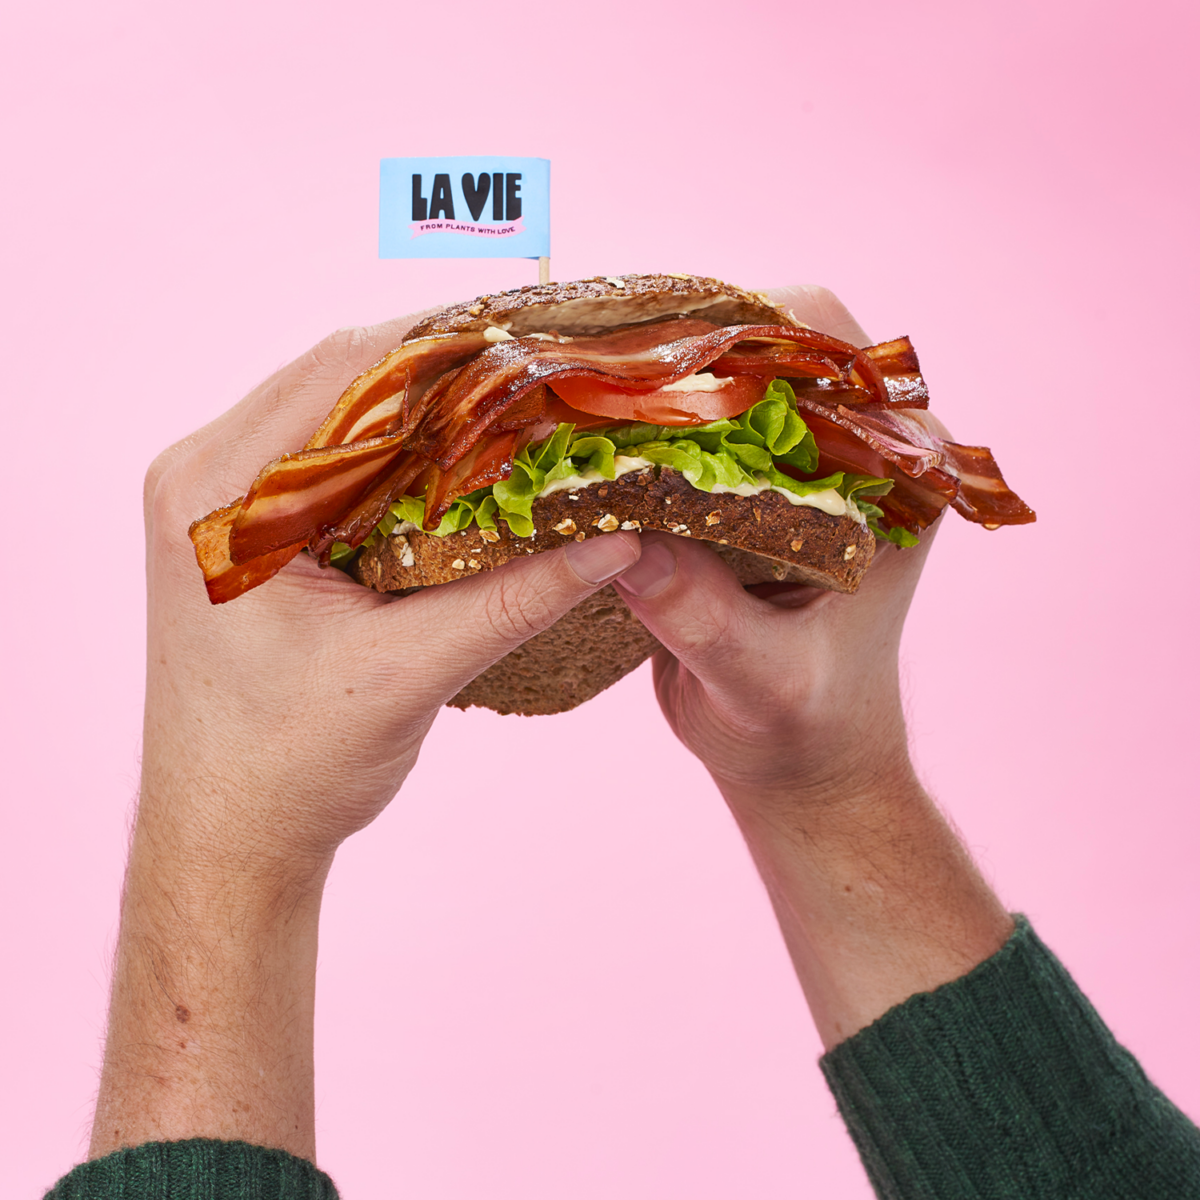 A vegan bacon sandwich containing rashers from plant-based brand La Vie